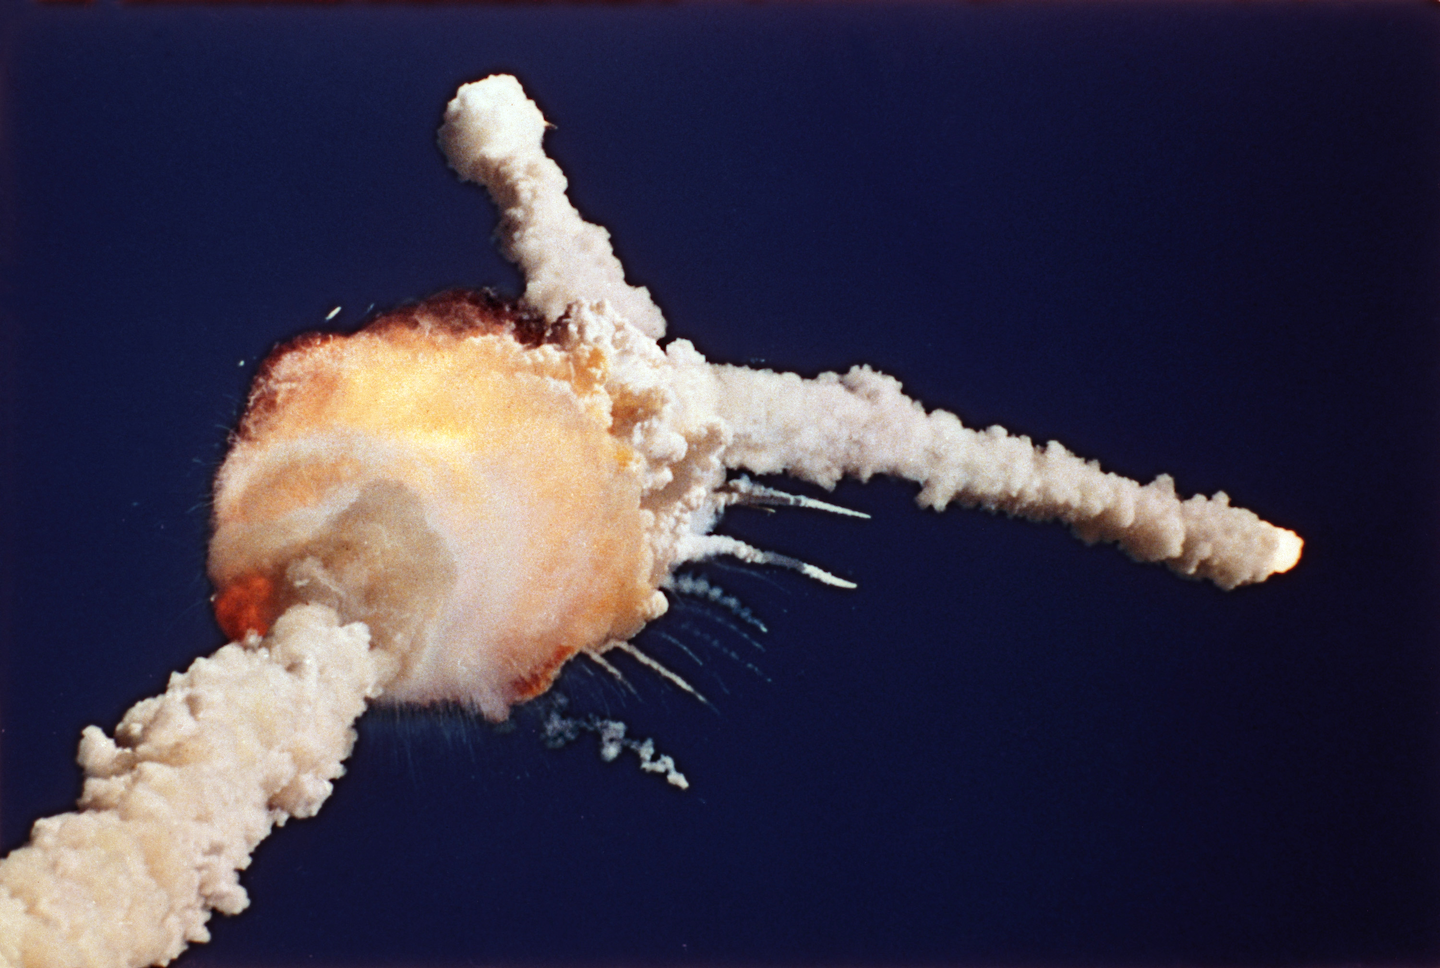 Today In Manufacturing History: The Challenger Explosion | Manufacturing.net1440 x 968